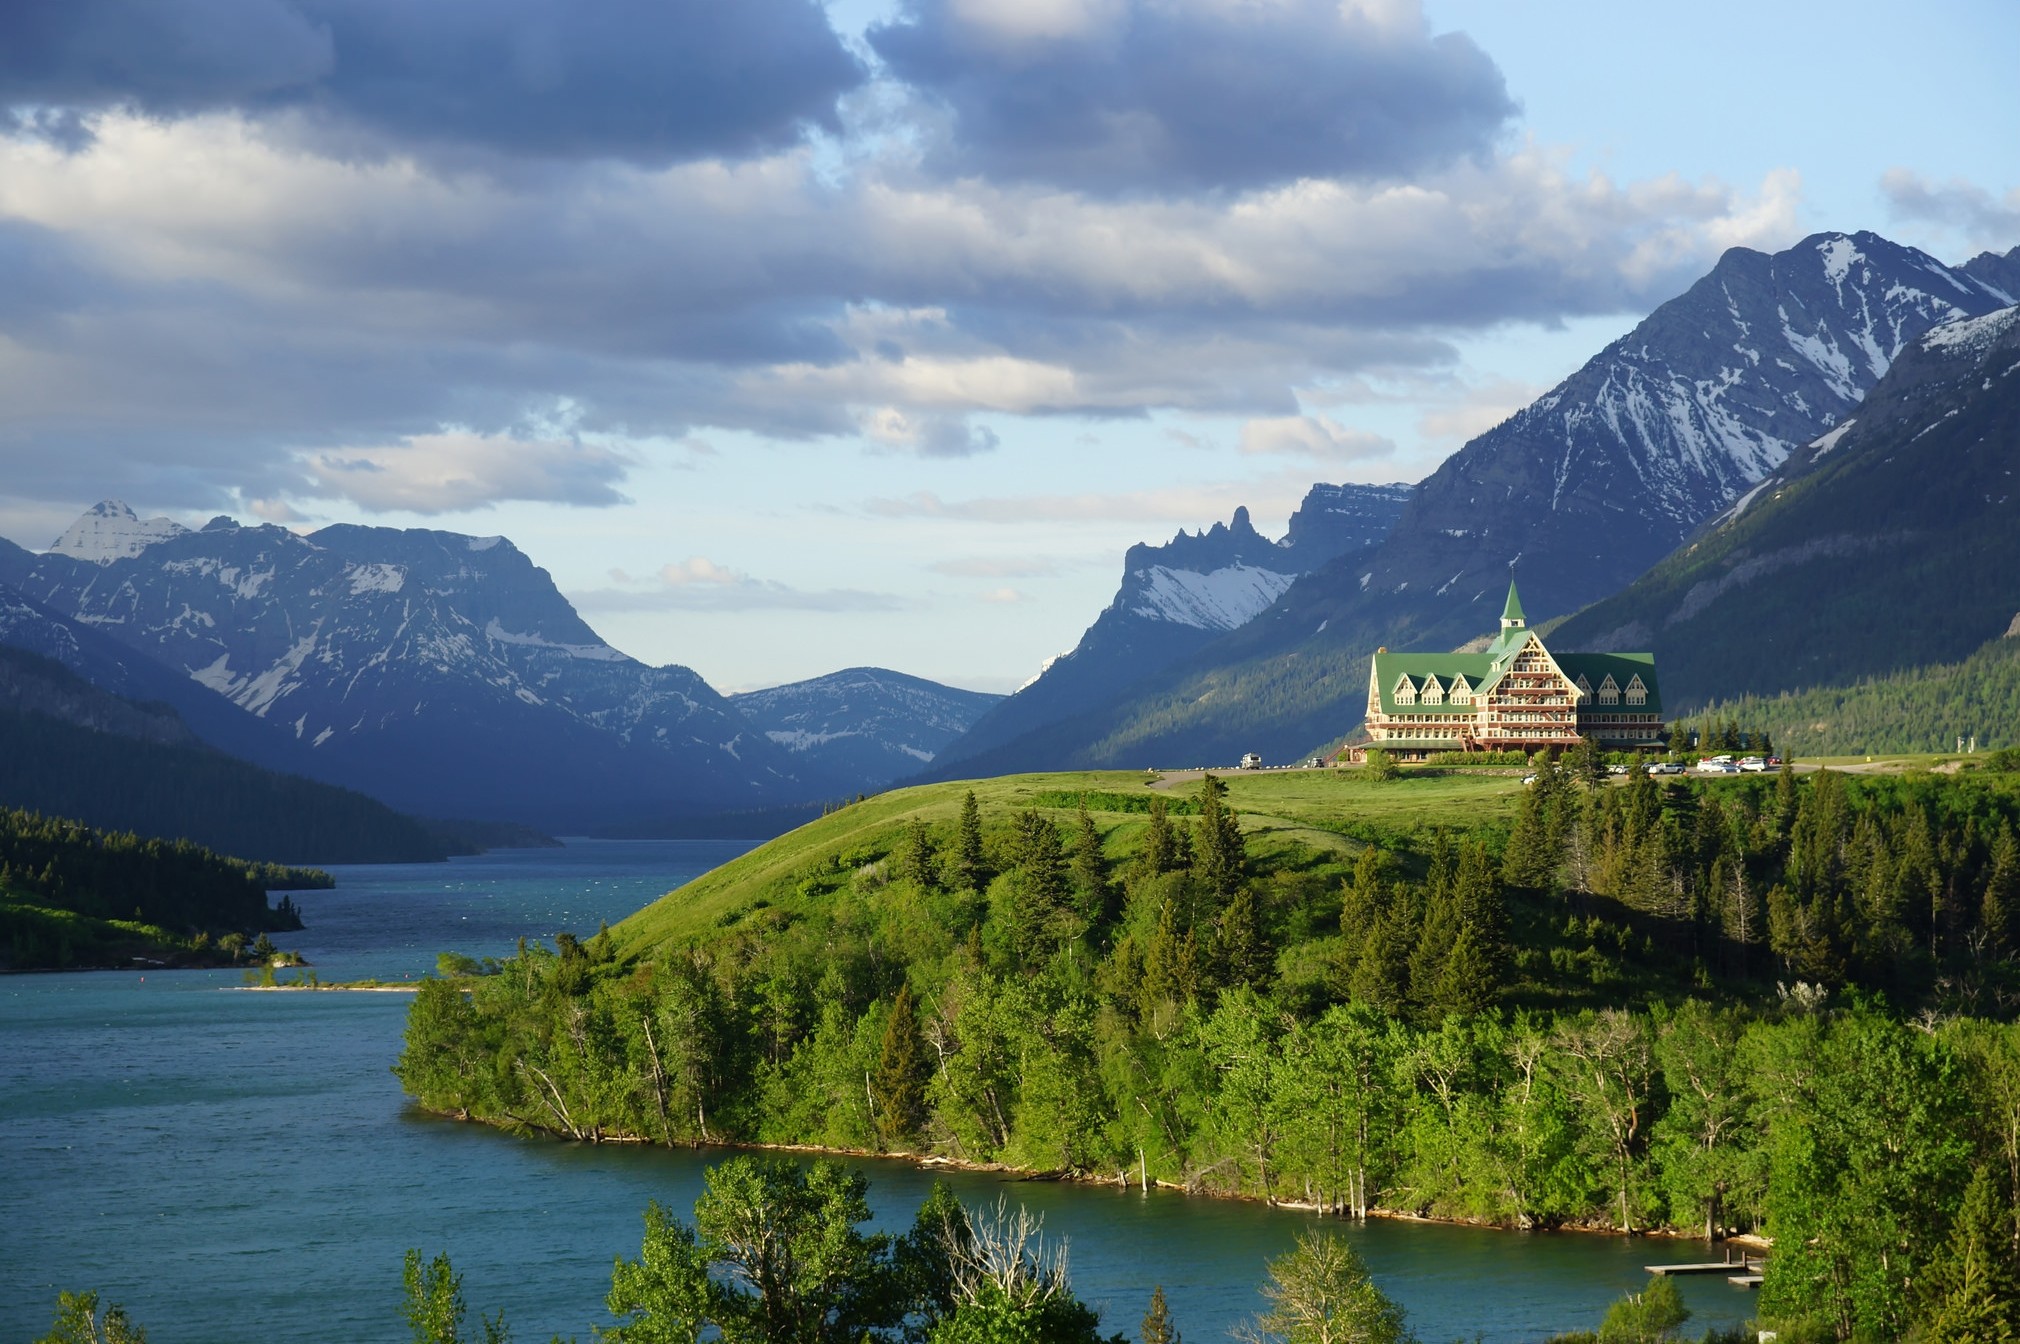 nature, Landscape, Photography, Mountains, Lake, Hotel, Grass, Trees, Canada Wallpaper